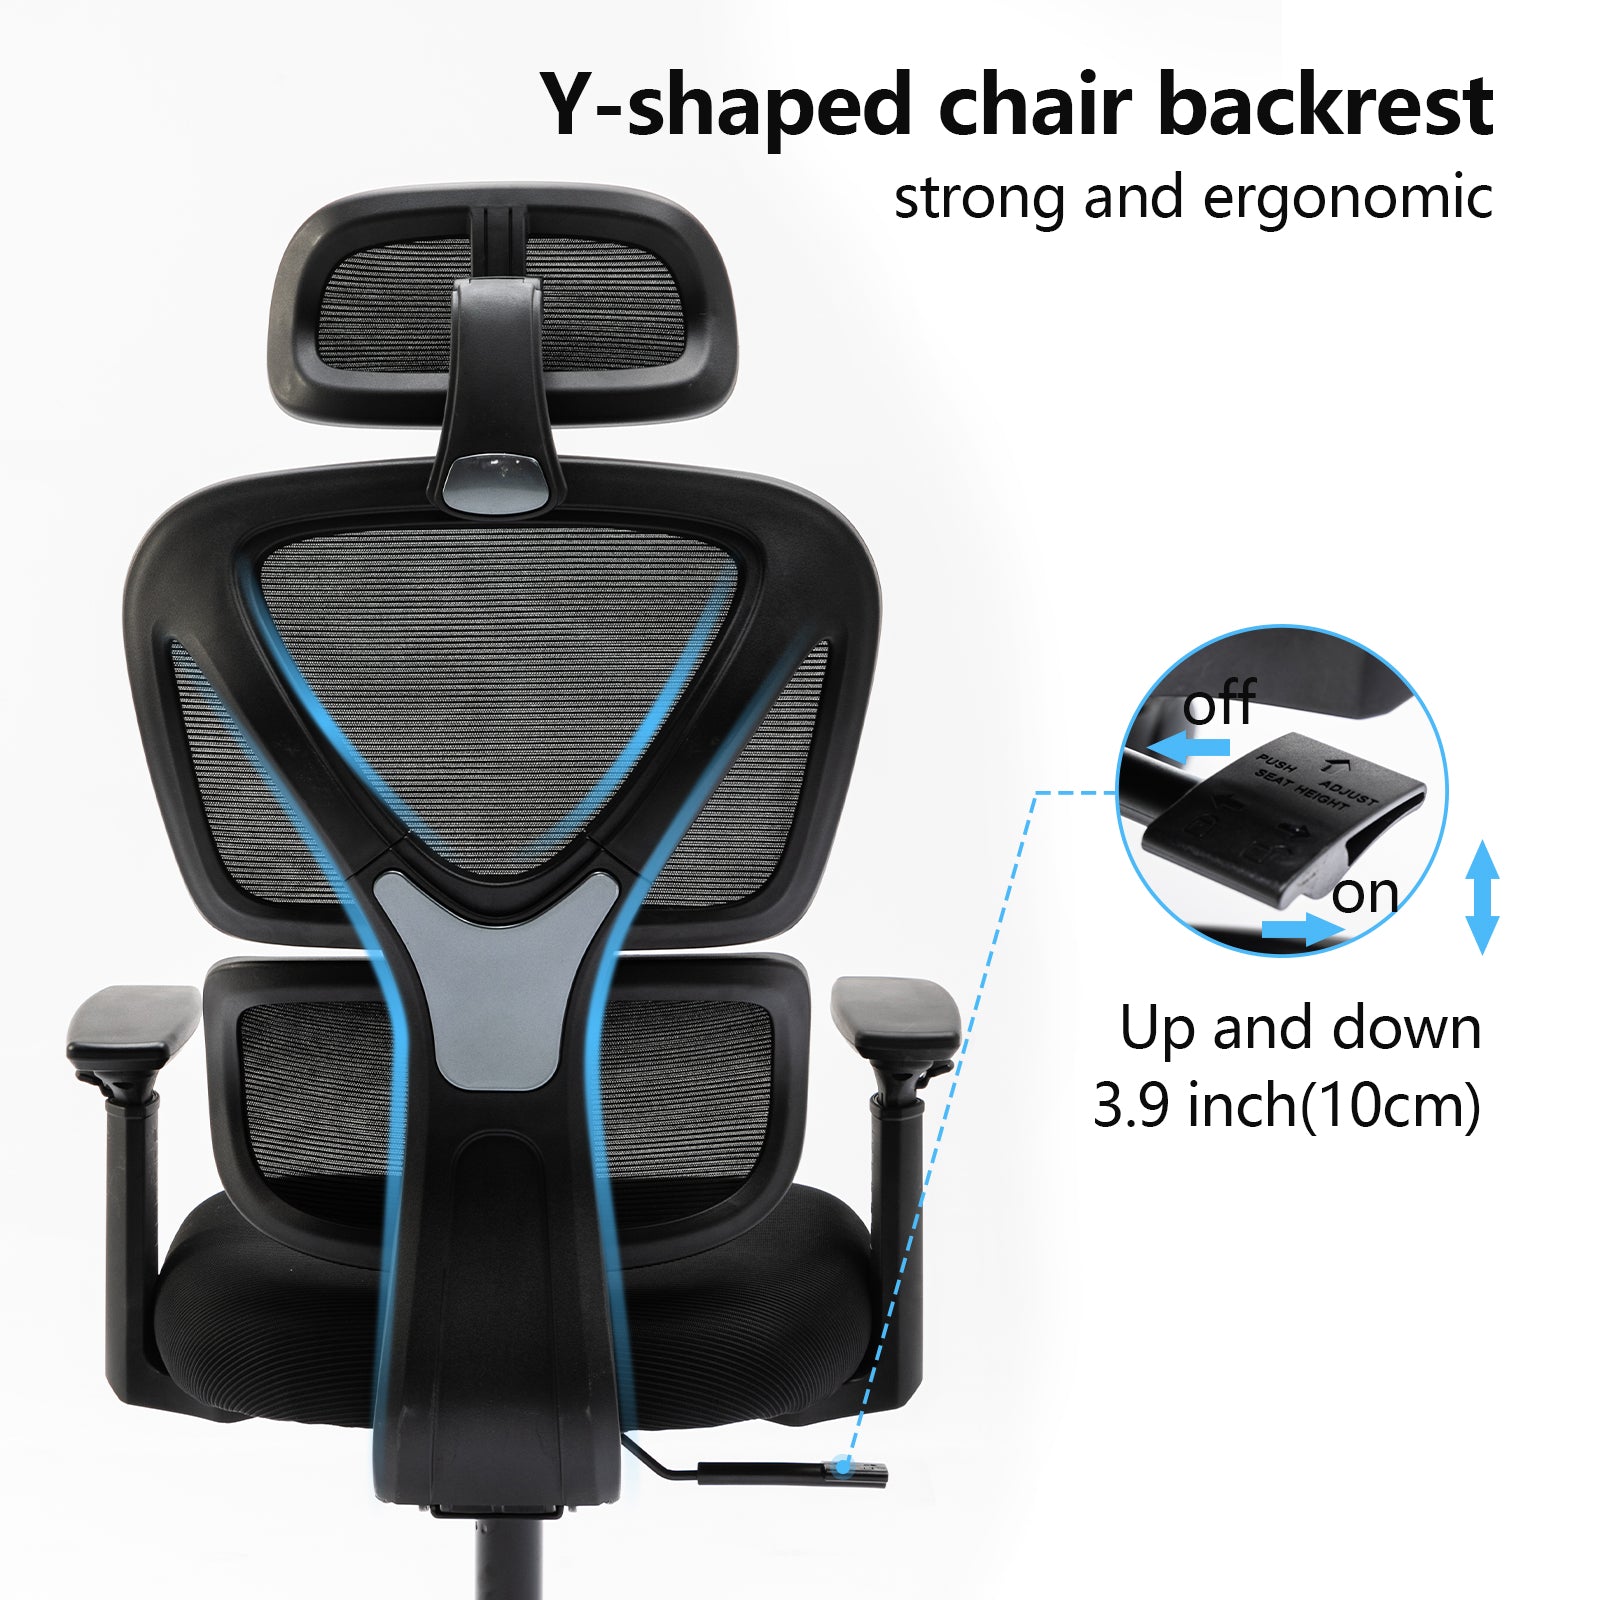 CLATINA Ergonomic Mesh Executive Chair with 4D Arm Rest and